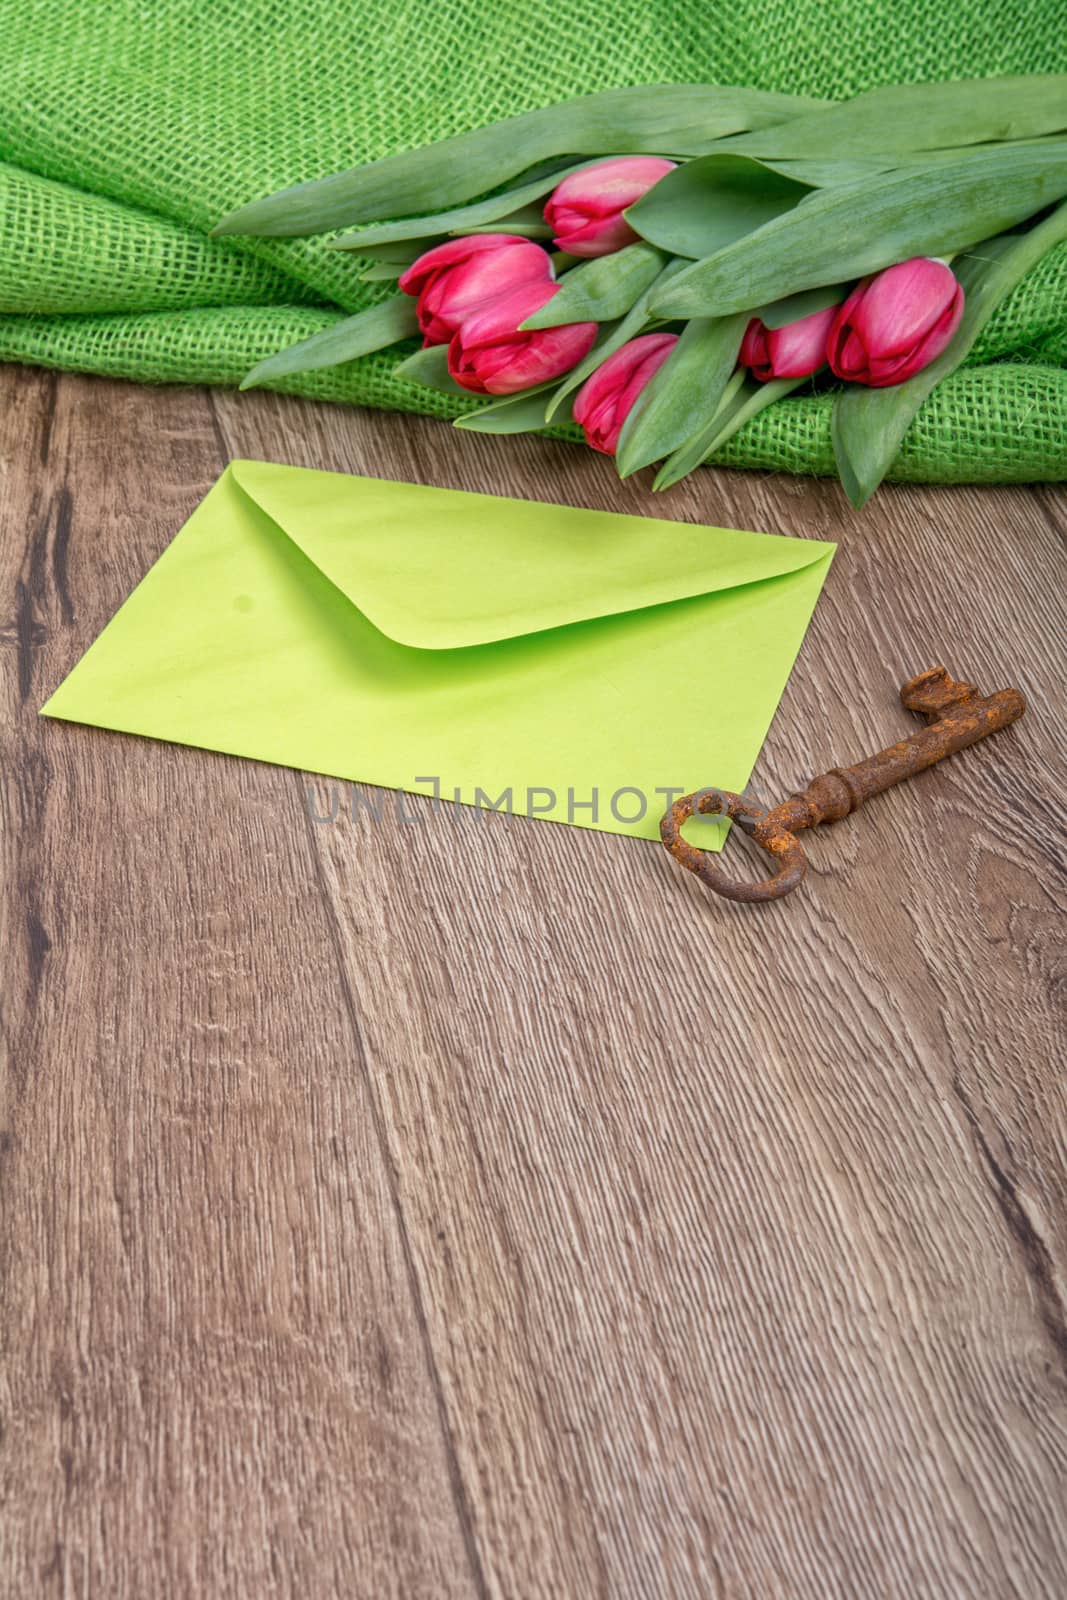 Envelope, rusty key and red tulip on a wooden background